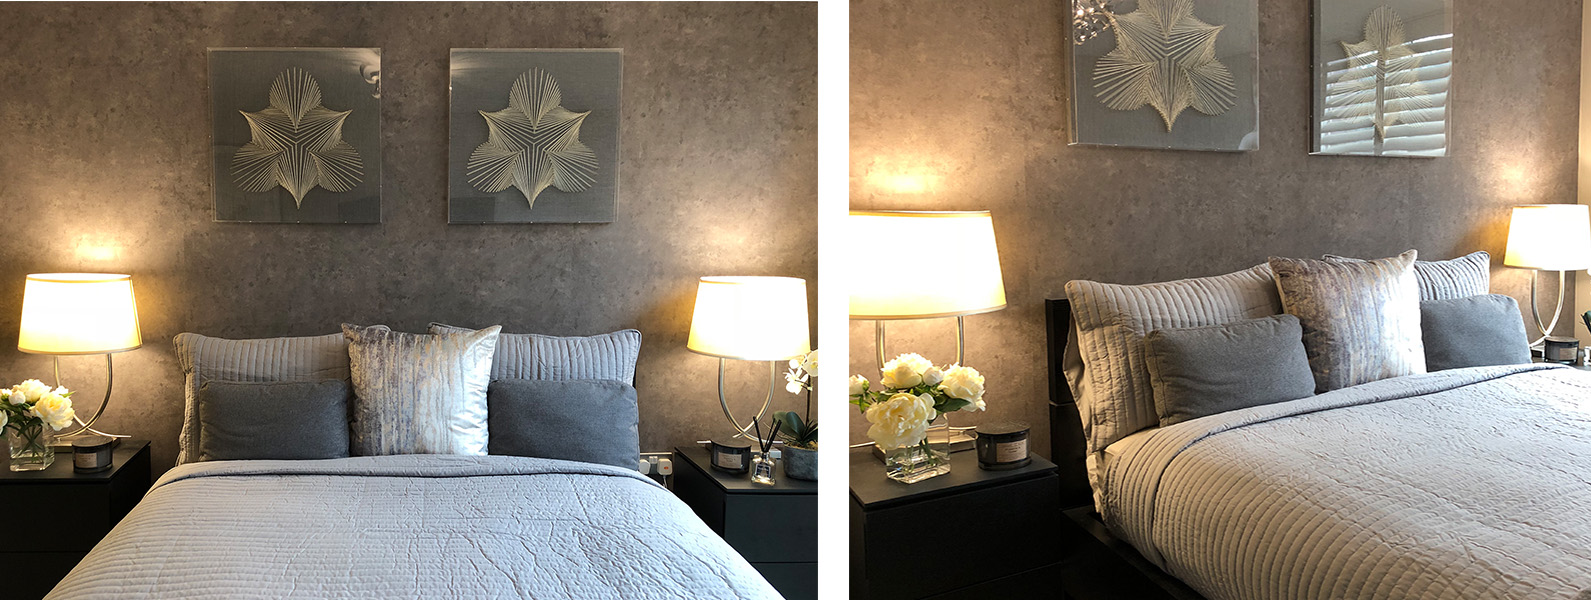 MasterMaster bedroom interior design and styling details by Moji Salehi at Moji Interiors in Hove.